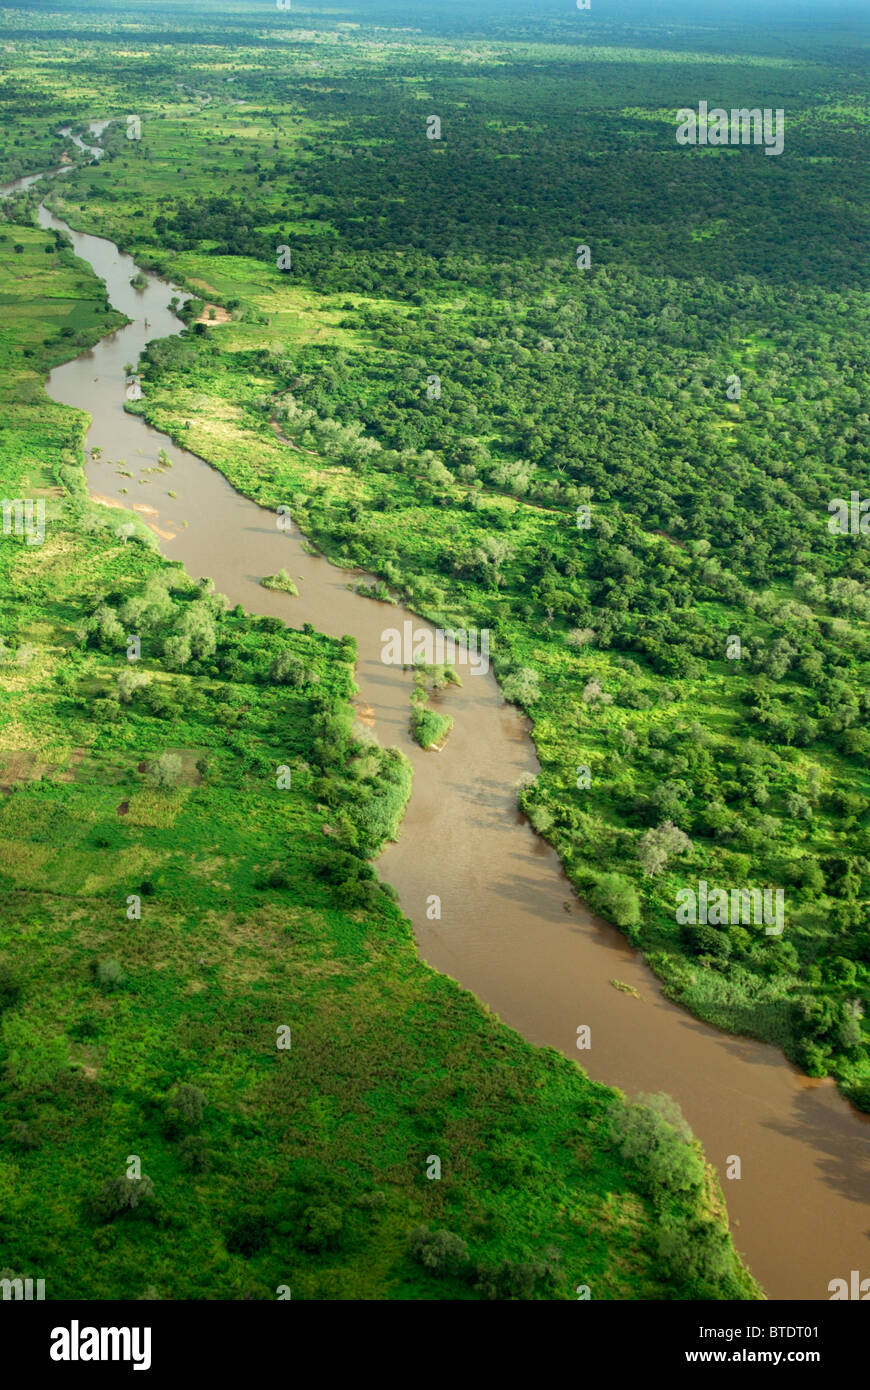 Aerial scenic view of tributary of Luangwa River Stock Photo